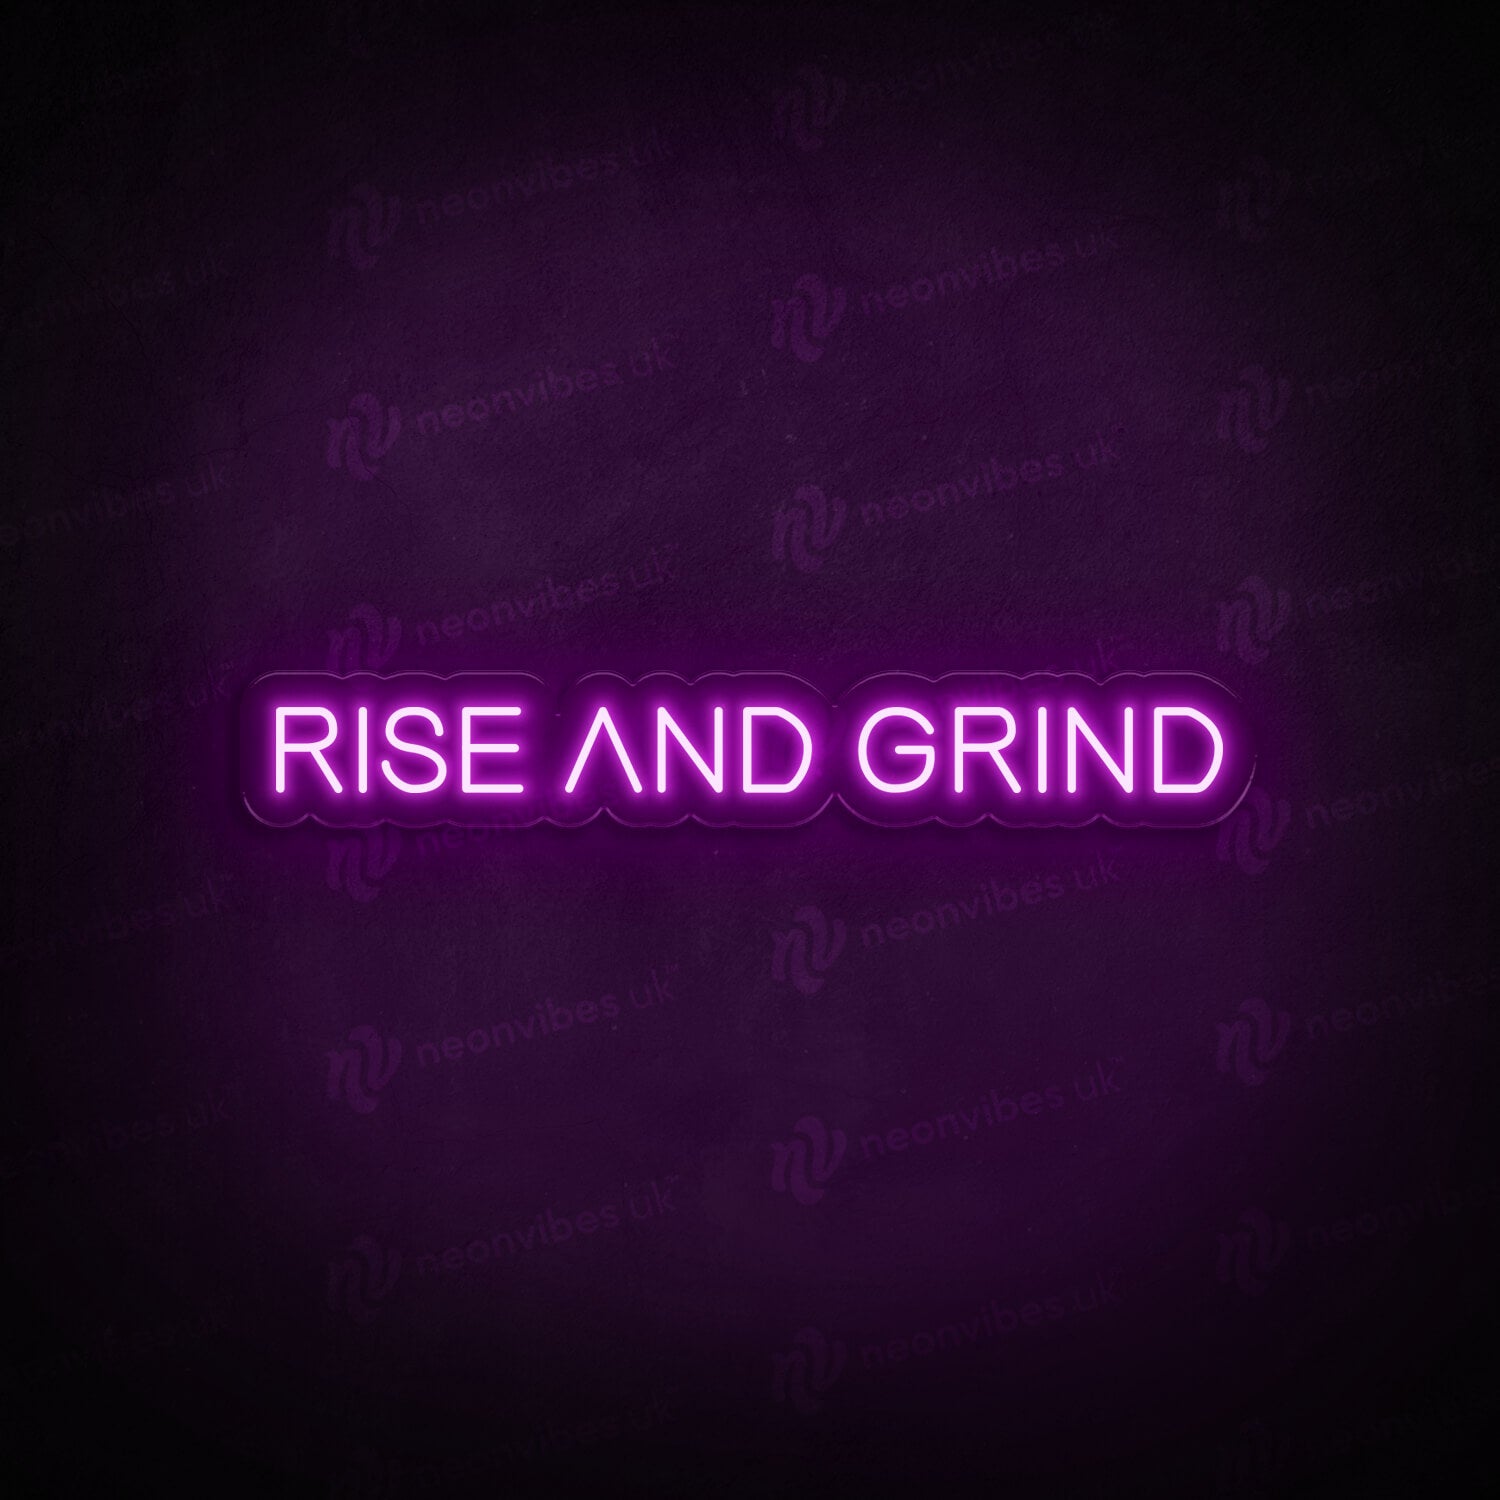 Rise And Grind neon sign